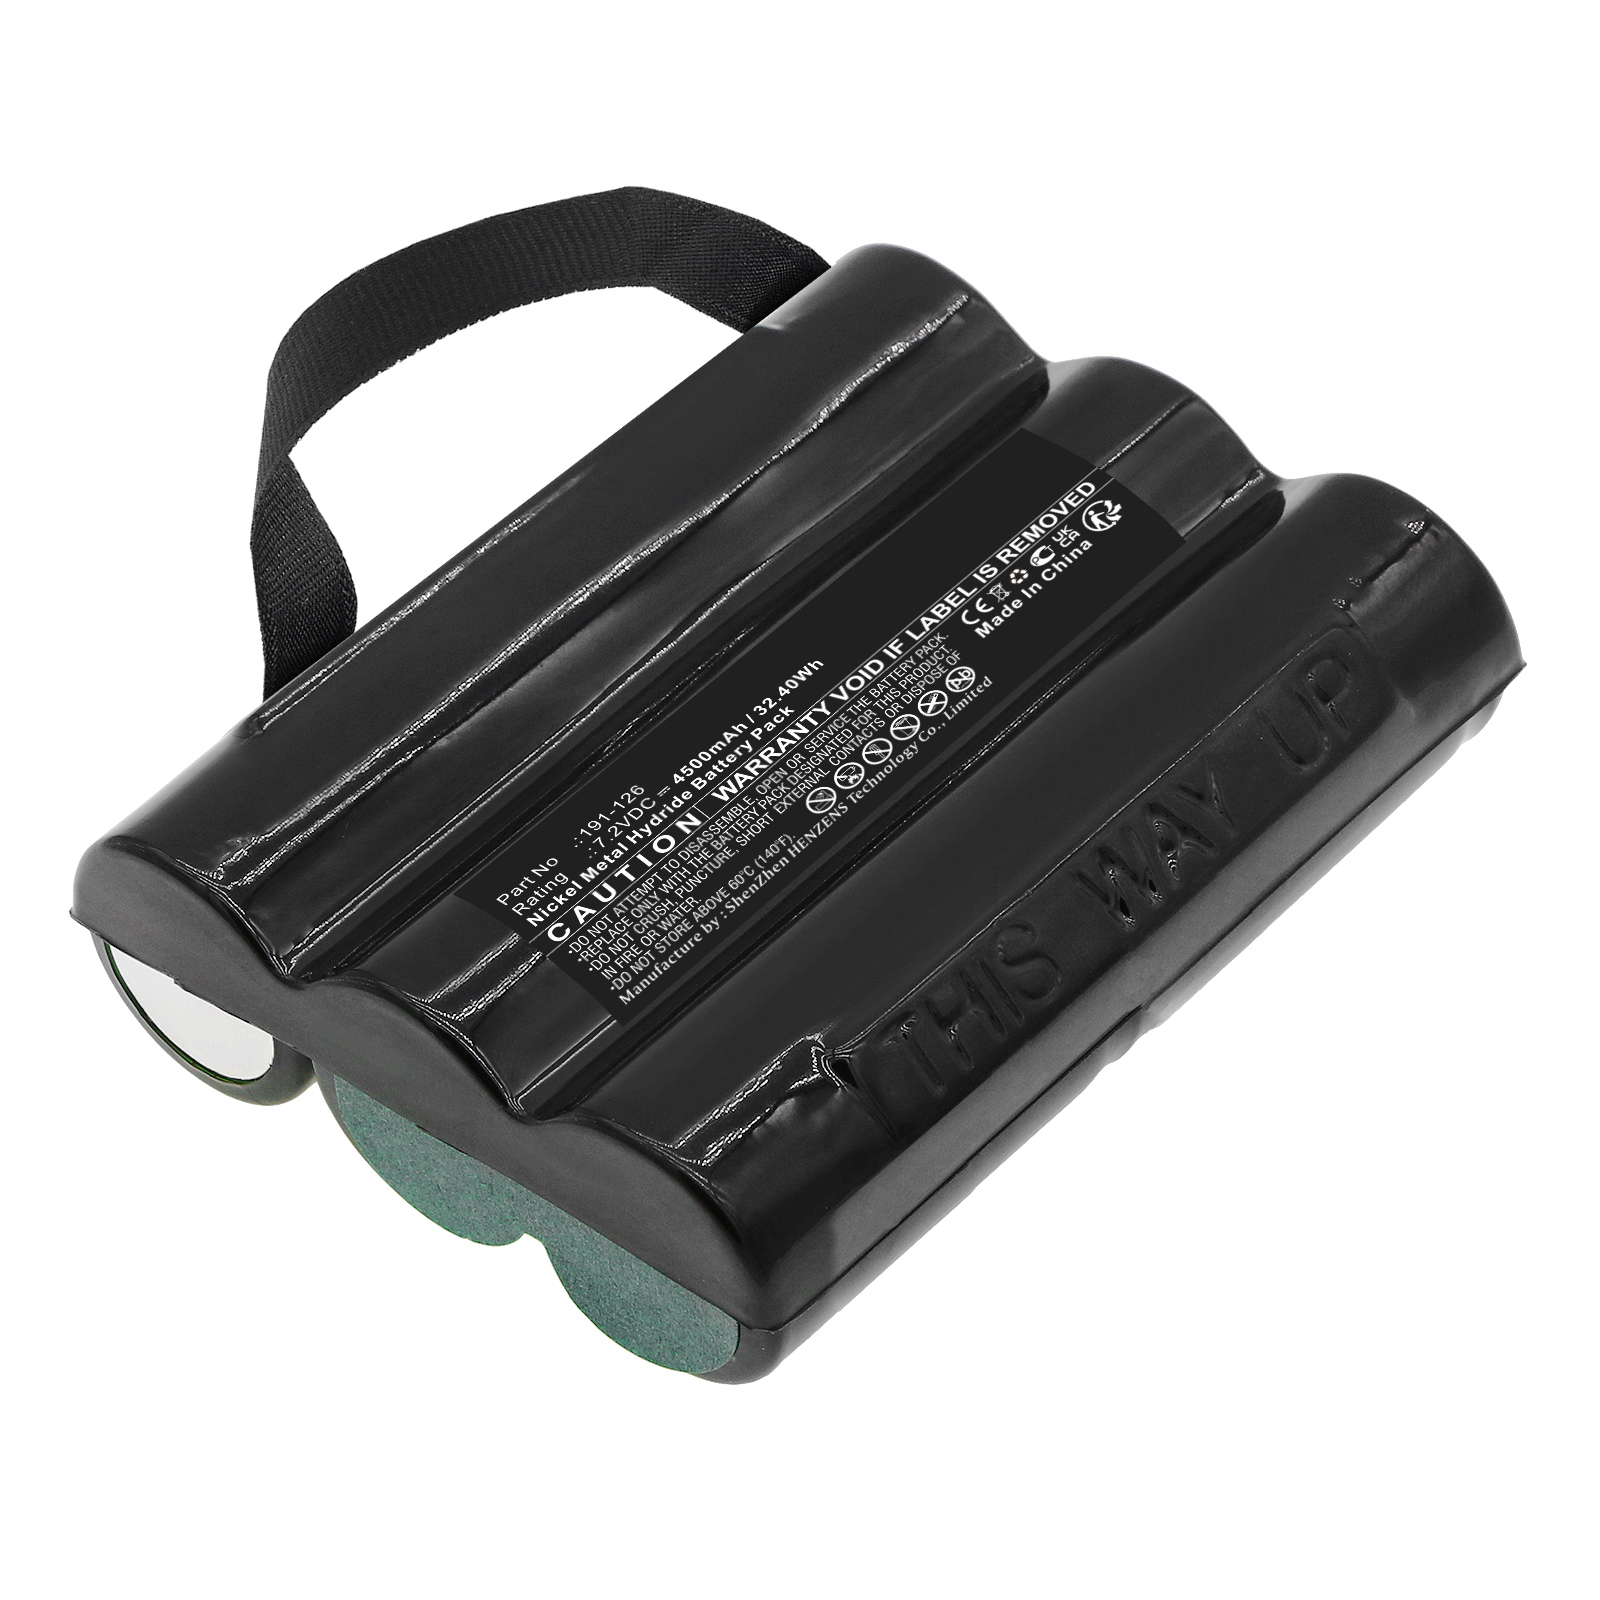 Synergy Digital Equipment Battery, Compatible with GE 191-126 Equipment Battery (Ni-MH, 7.2V, 4500mAh)